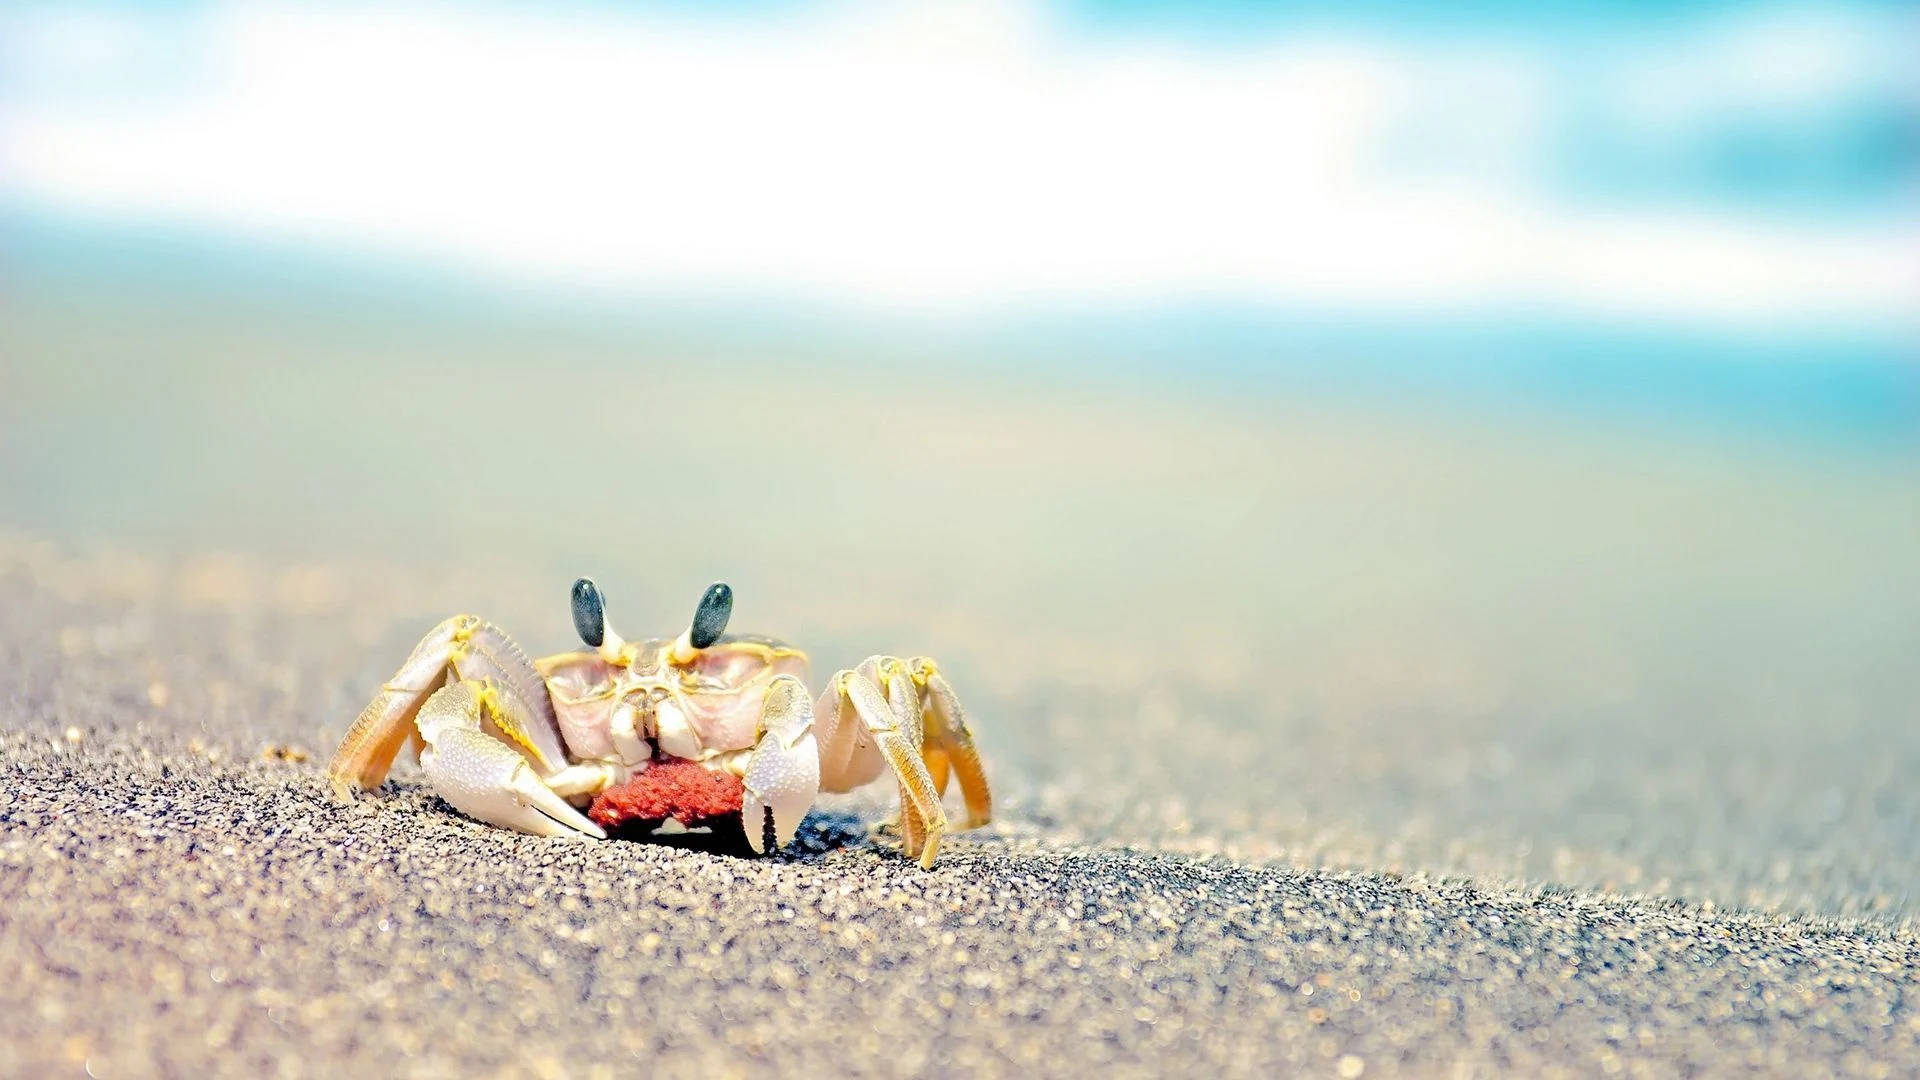 Small Crab In Beach Sand Wallpaper